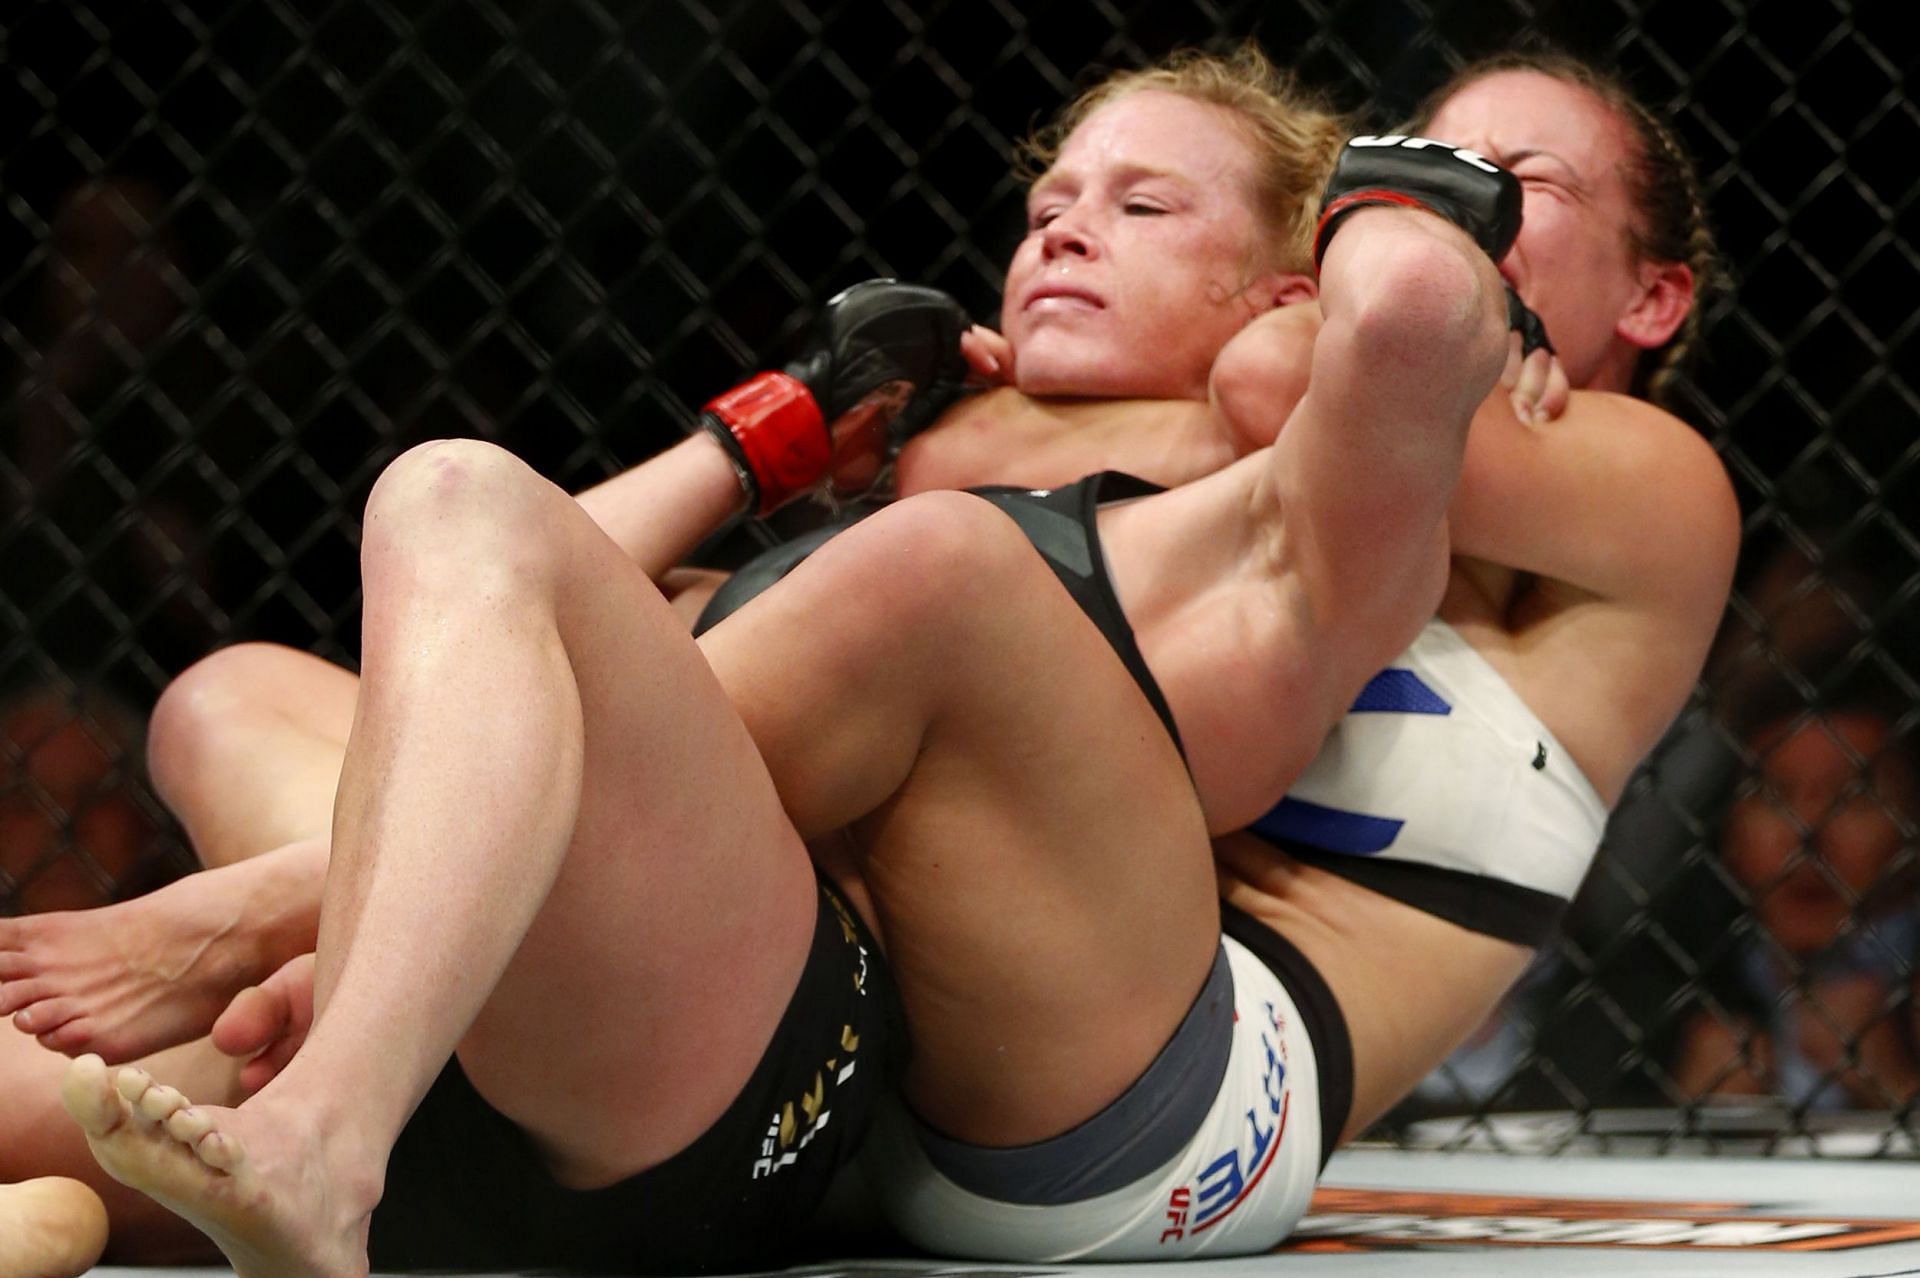 Just moments remained when Miesha Tate choked out Holly Holm in their bantamweight title bout